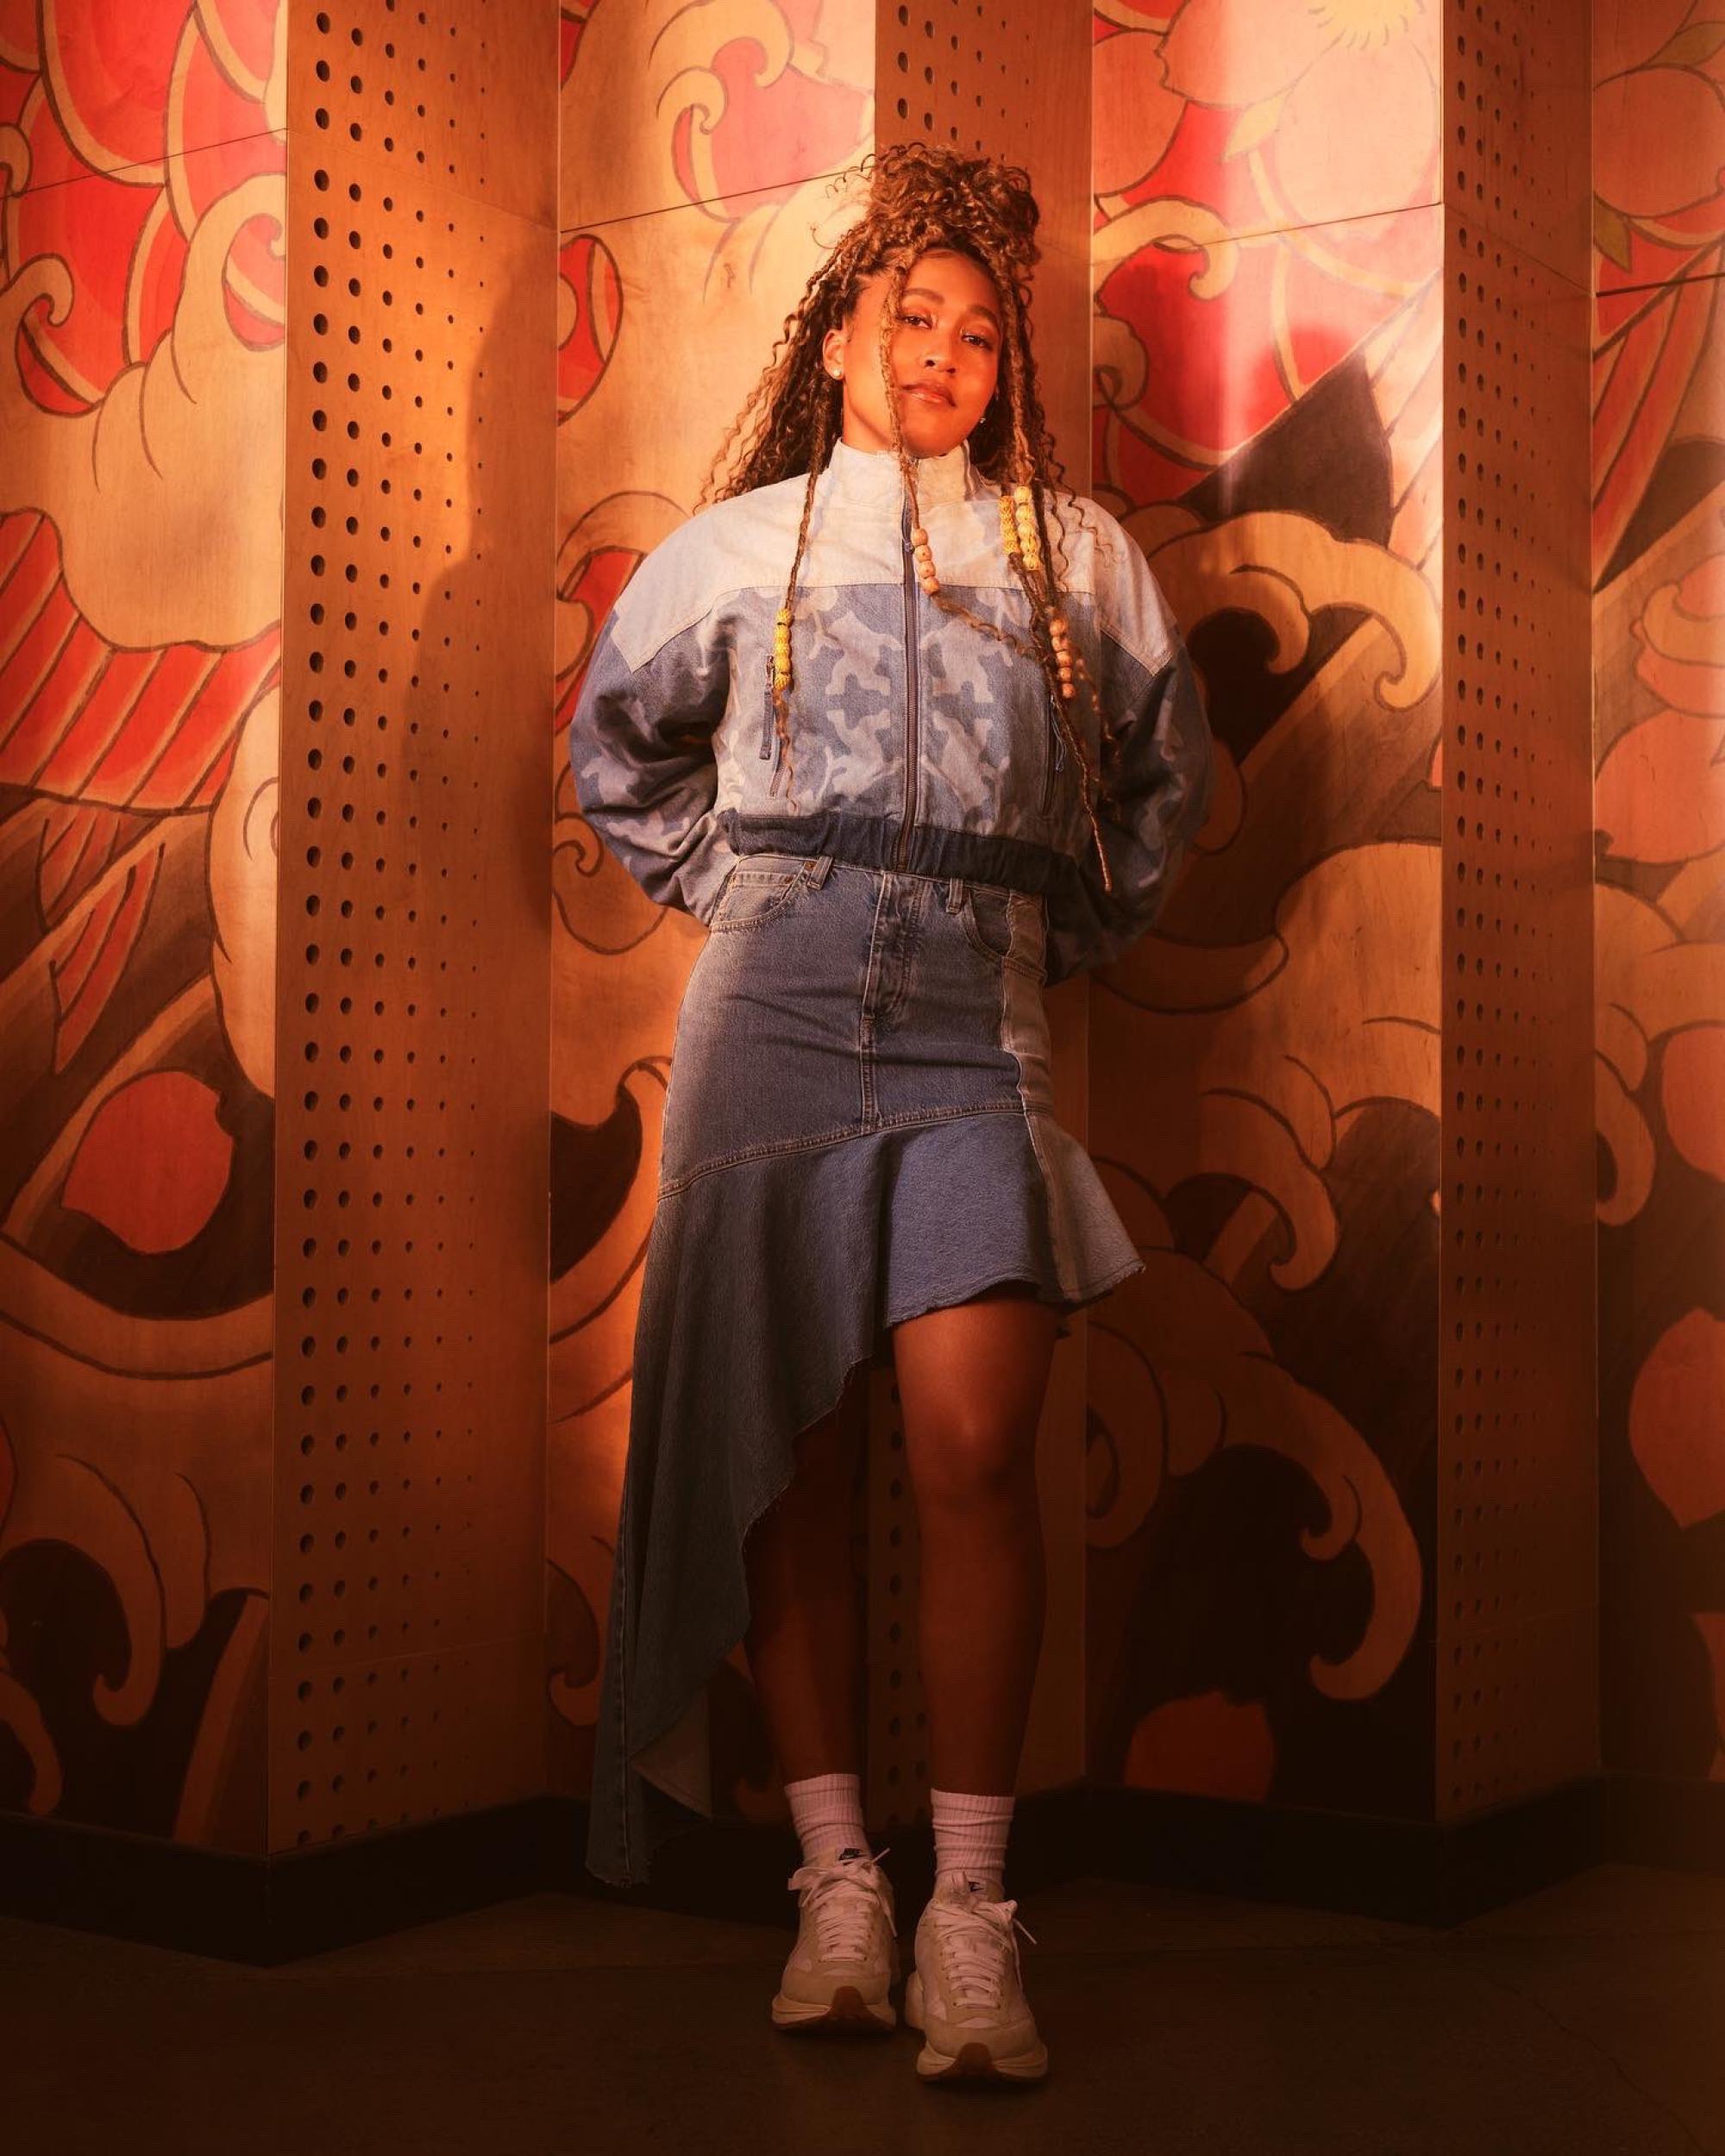 6 of Naomi Osaka's best fashion moments off the court: the tennis